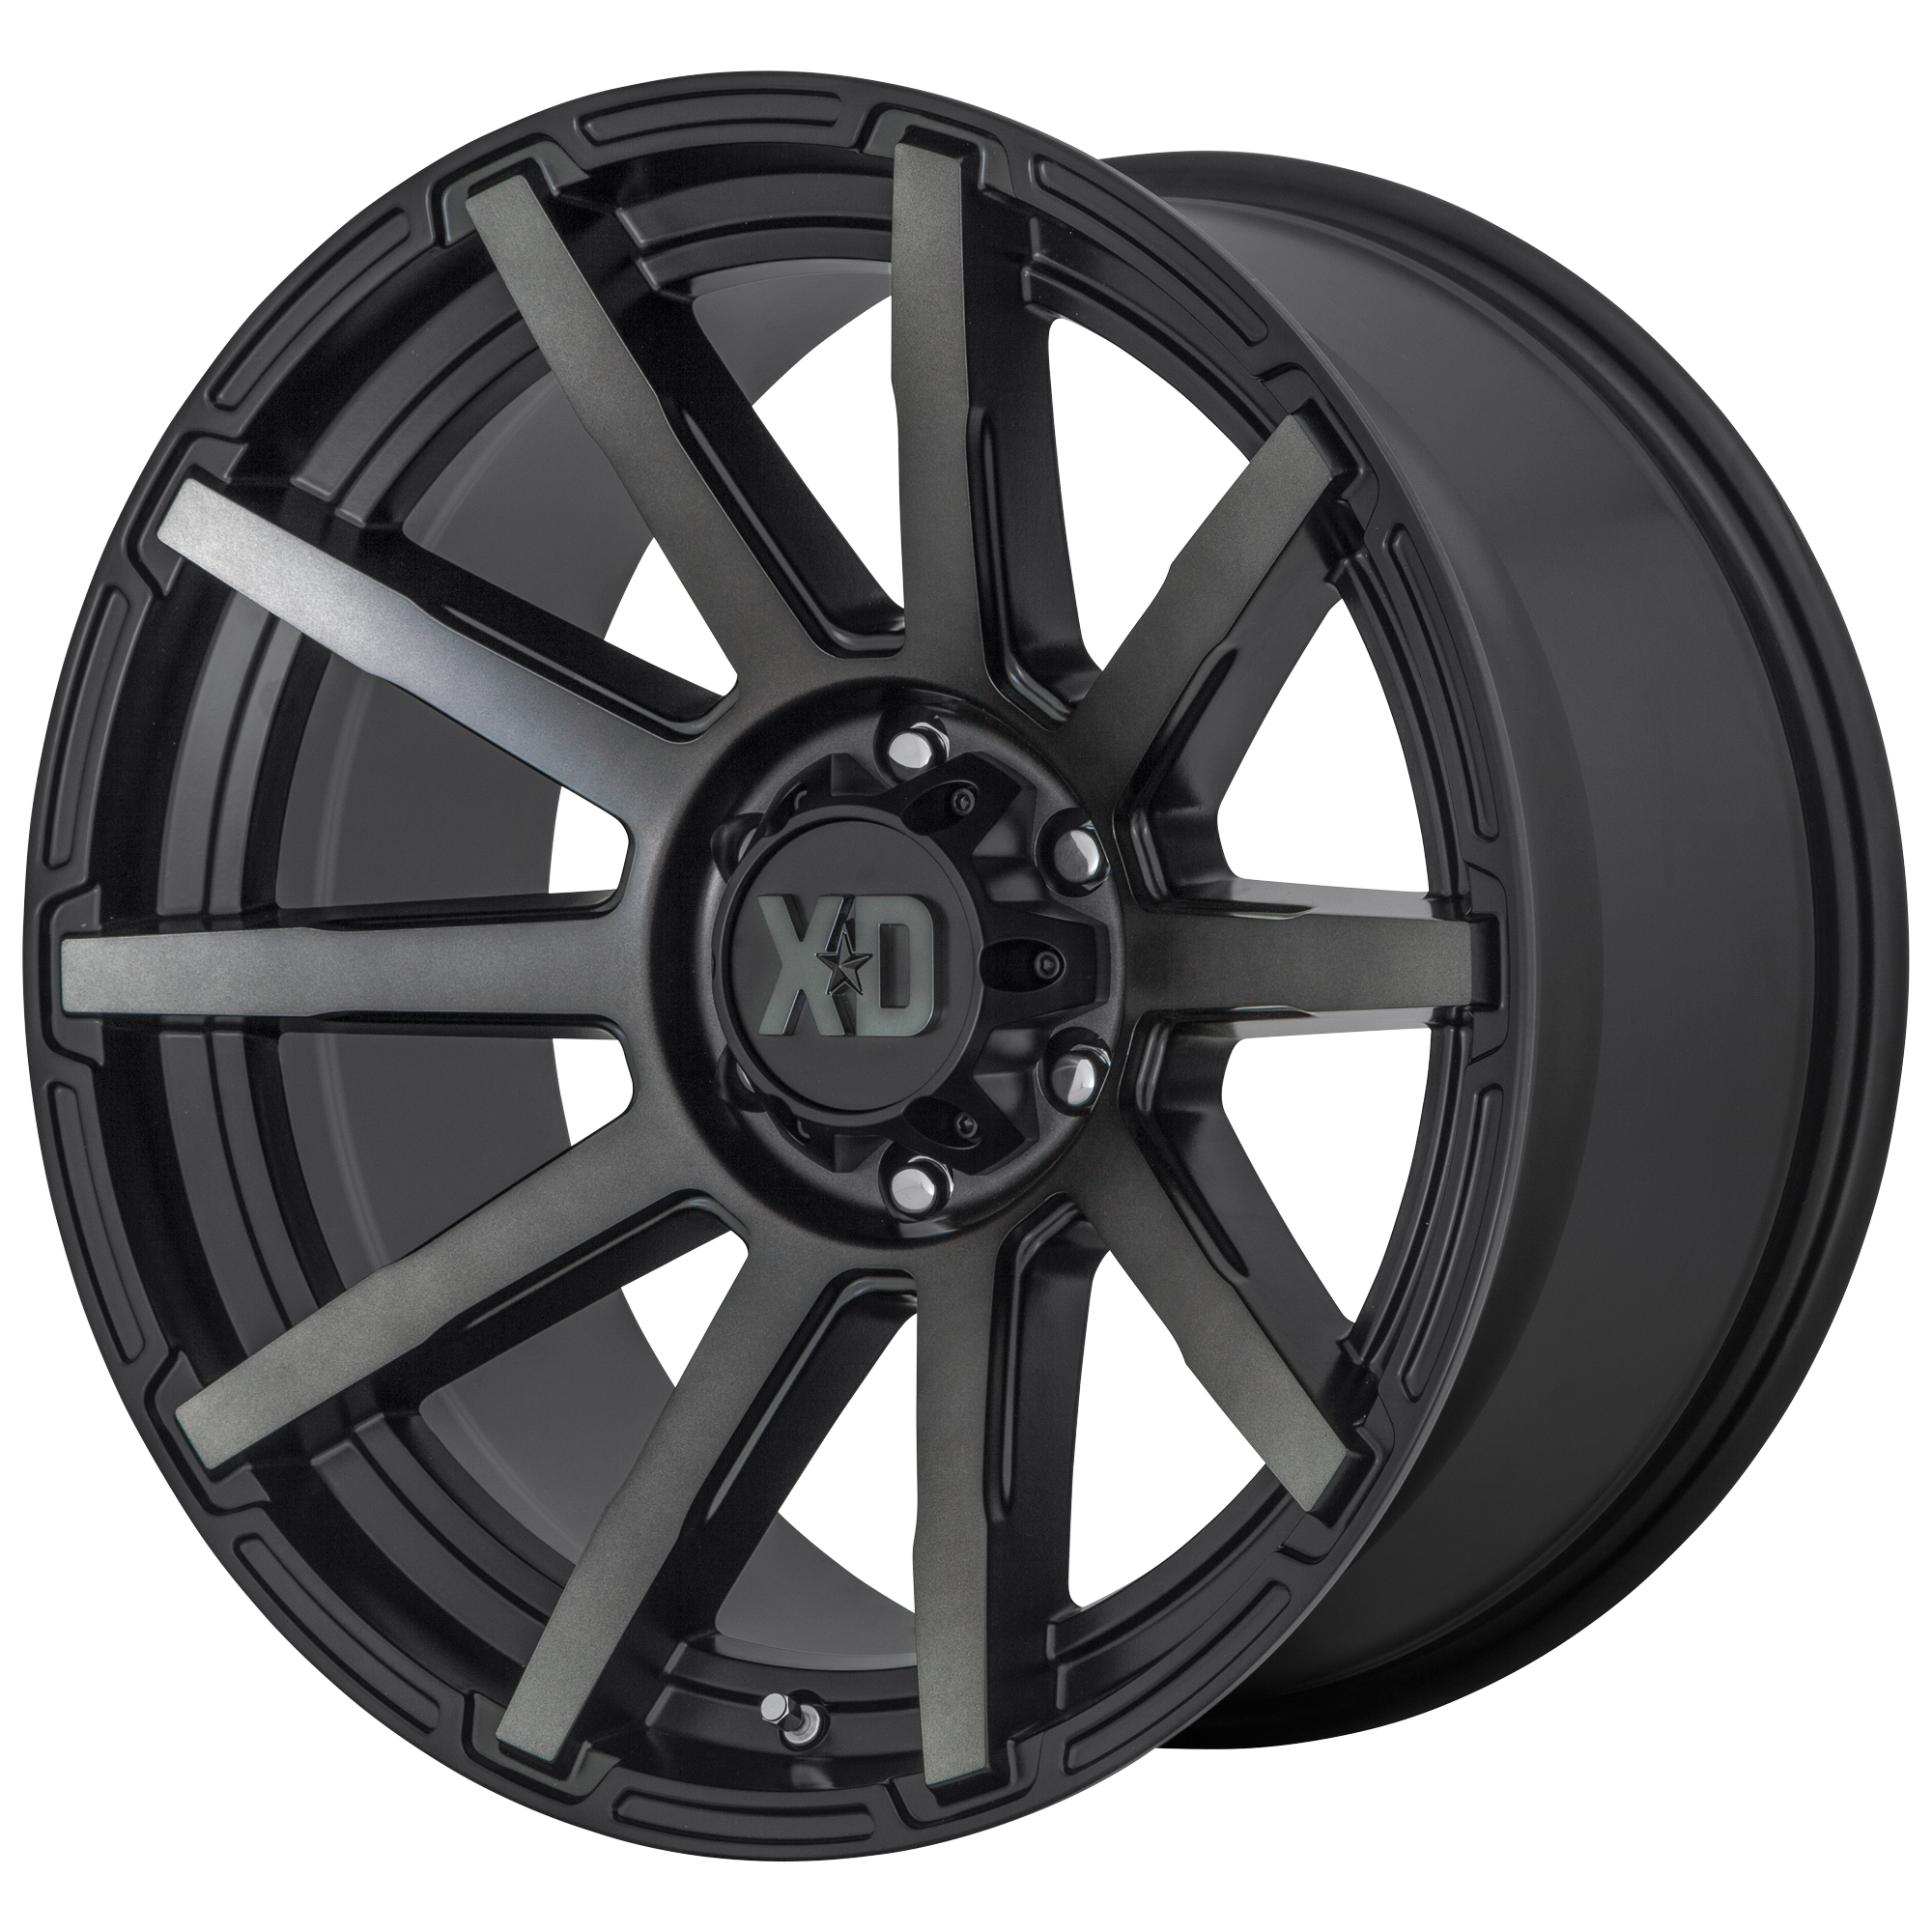 OUTBREAK 18x9 6x120.00 SATIN BLACK W/ GRAY TINT (12 mm) - Tires and Engine Performance